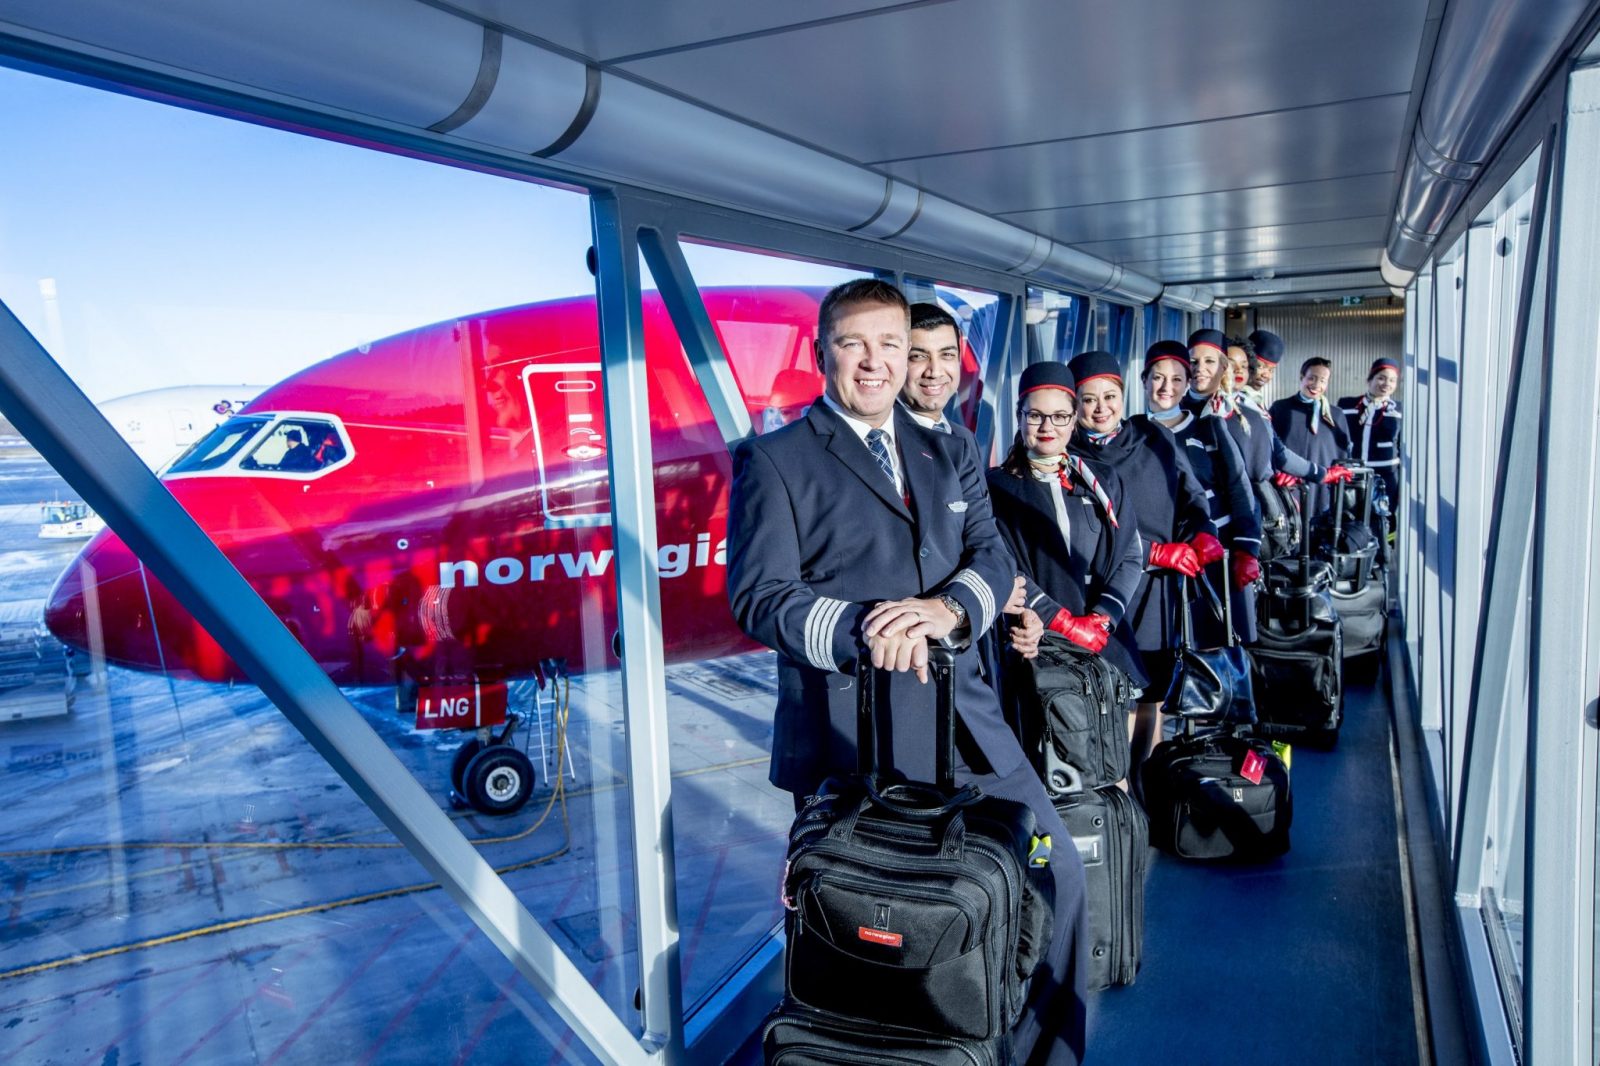 Norwegian and British Airways Strike Important Pay Deals With Their Pilots and Cabin Crew